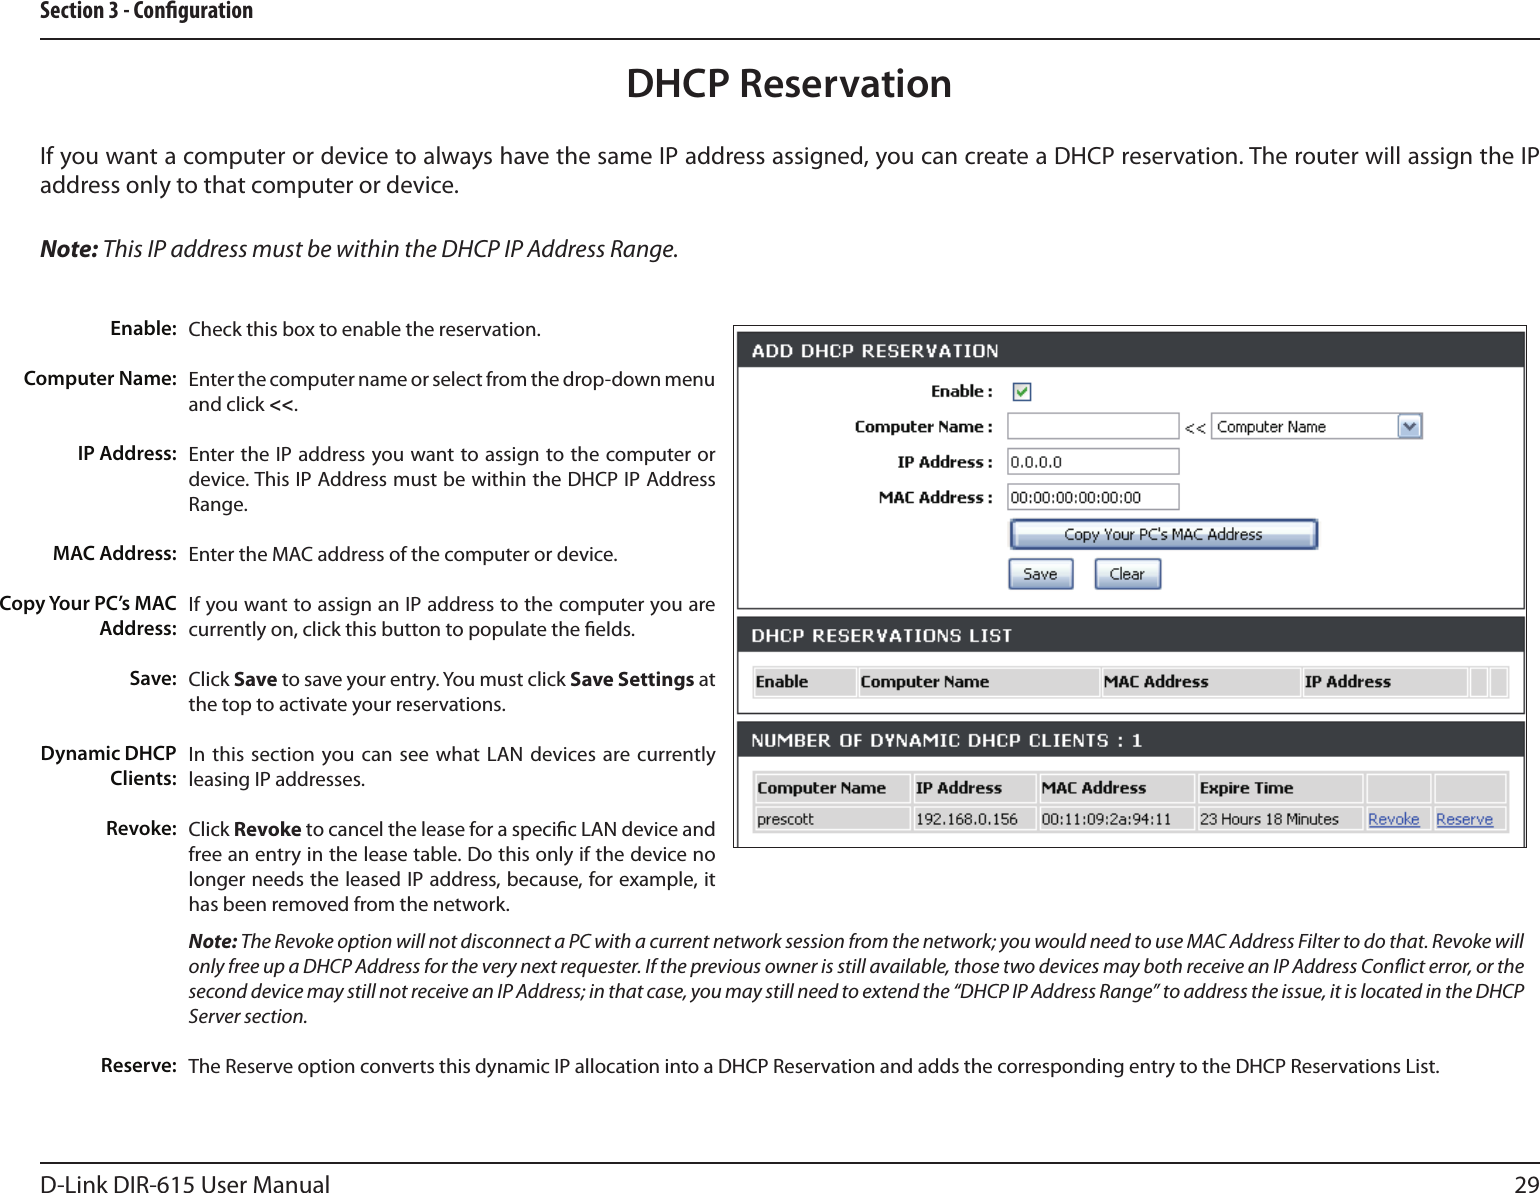 29D-Link DIR-615 User ManualSection 3 - CongurationDHCP ReservationIf you want a computer or device to always have the same IP address assigned, you can create a DHCP reservation. The router will assign the IP address only to that computer or device. Note: This IP address must be within the DHCP IP Address Range.Check this box to enable the reservation.Enter the computer name or select from the drop-down menu and click &lt;&lt;.Enter the IP address you want to assign to the computer or device. This IP Address must be within the DHCP IP Address Range.Enter the MAC address of the computer or device.If you want to assign an IP address to the computer you are currently on, click this button to populate the elds. Click Save to save your entry. You must click Save Settings at the top to activate your reservations. In this section  you can see what  LAN  devices are currently leasing IP addresses.Click Revoke to cancel the lease for a specic LAN device and free an entry in the lease table. Do this only if the device no longer needs the leased IP address, because, for example, it has been removed from the network.Note: The Revoke option will not disconnect a PC with a current network session from the network; you would need to use MAC Address Filter to do that. Revoke will only free up a DHCP Address for the very next requester. If the previous owner is still available, those two devices may both receive an IP Address Conict error, or the second device may still not receive an IP Address; in that case, you may still need to extend the “DHCP IP Address Range” to address the issue, it is located in the DHCP Server section.  The Reserve option converts this dynamic IP allocation into a DHCP Reservation and adds the corresponding entry to the DHCP Reservations List.Enable:Computer Name:IP Address:MAC Address:Copy Your PC’s MAC Address:Save:Dynamic DHCP Clients:Revoke:Reserve: